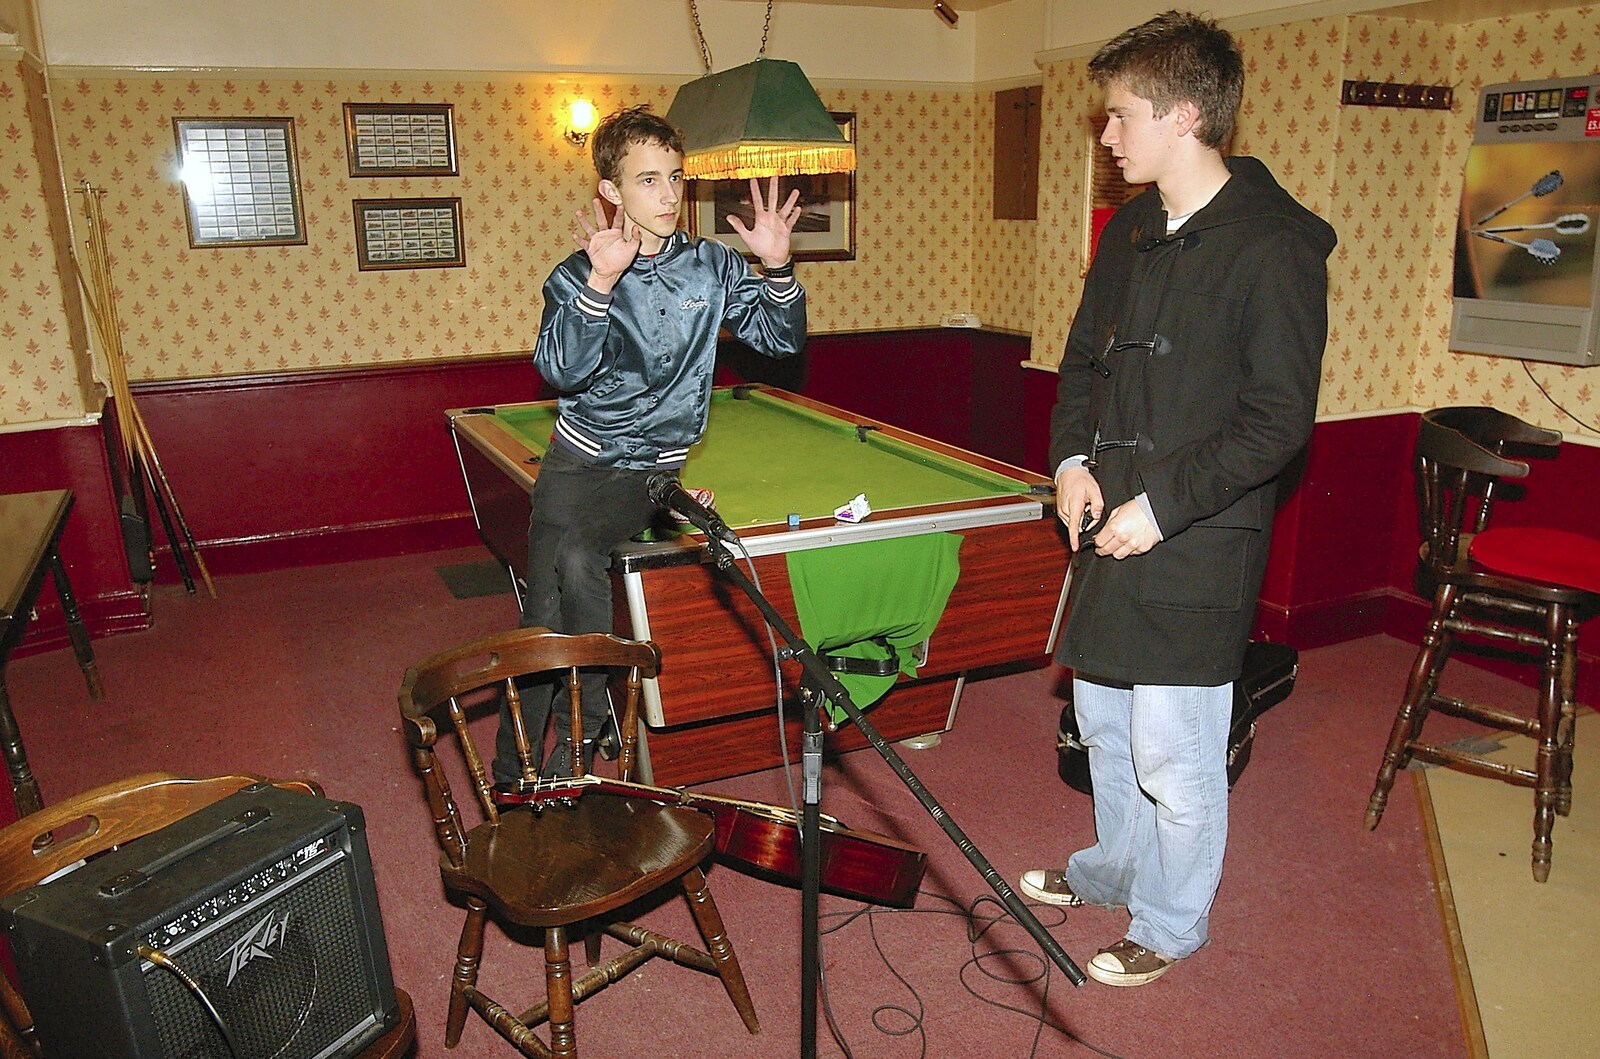 Hands up on the pool table from Rory Hill's "Tour in a Night", Norfolk and Suffolk - 17th November 2006